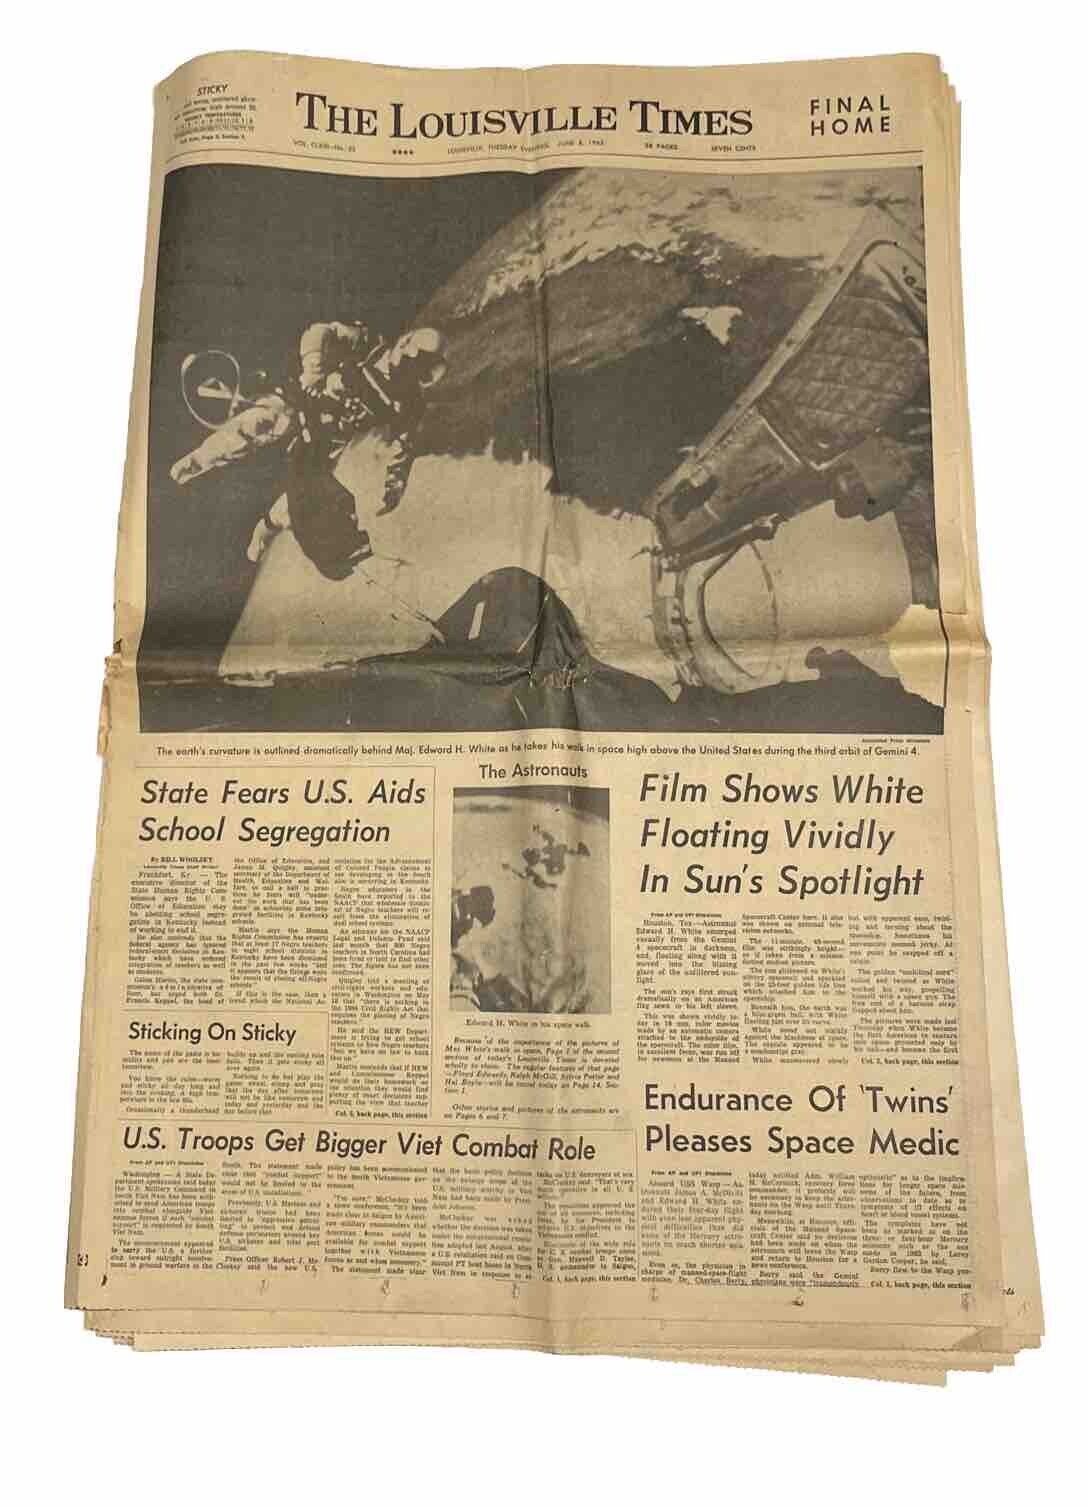 1965 JUNE 8 THE LOUISVILLE TIMES NEWSPAPER - GEMINI 4 BACK FROM SPACE - (W)